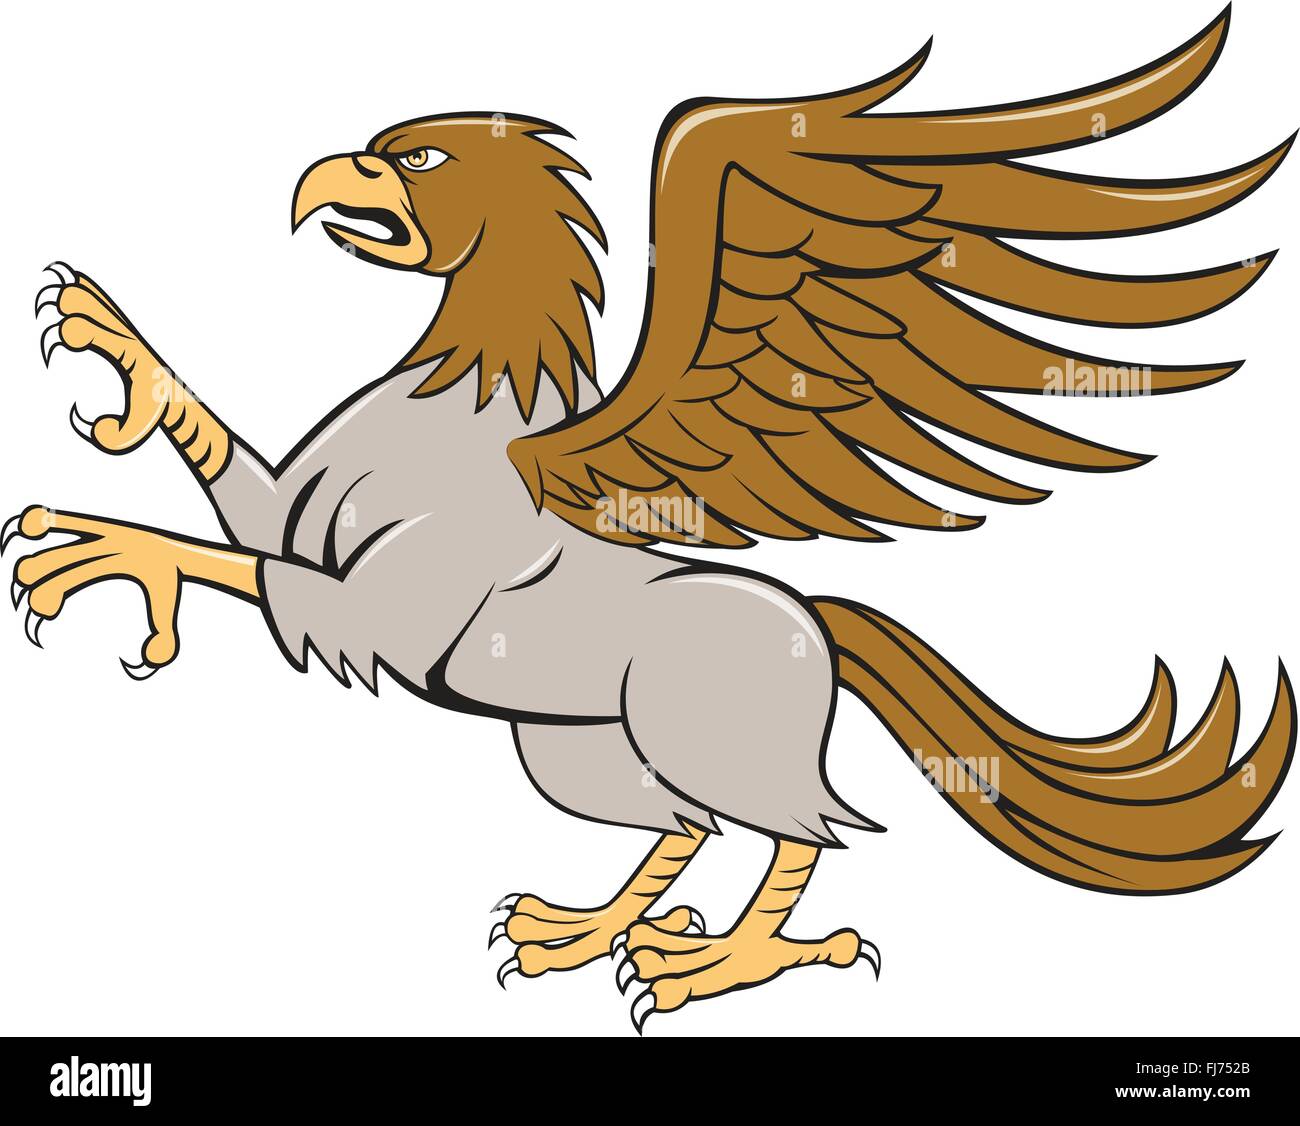 Illustration of a hippogriff or hippogryph, legendary creature with front quarters of an eagle and the hind quarters of a horse Stock Vector